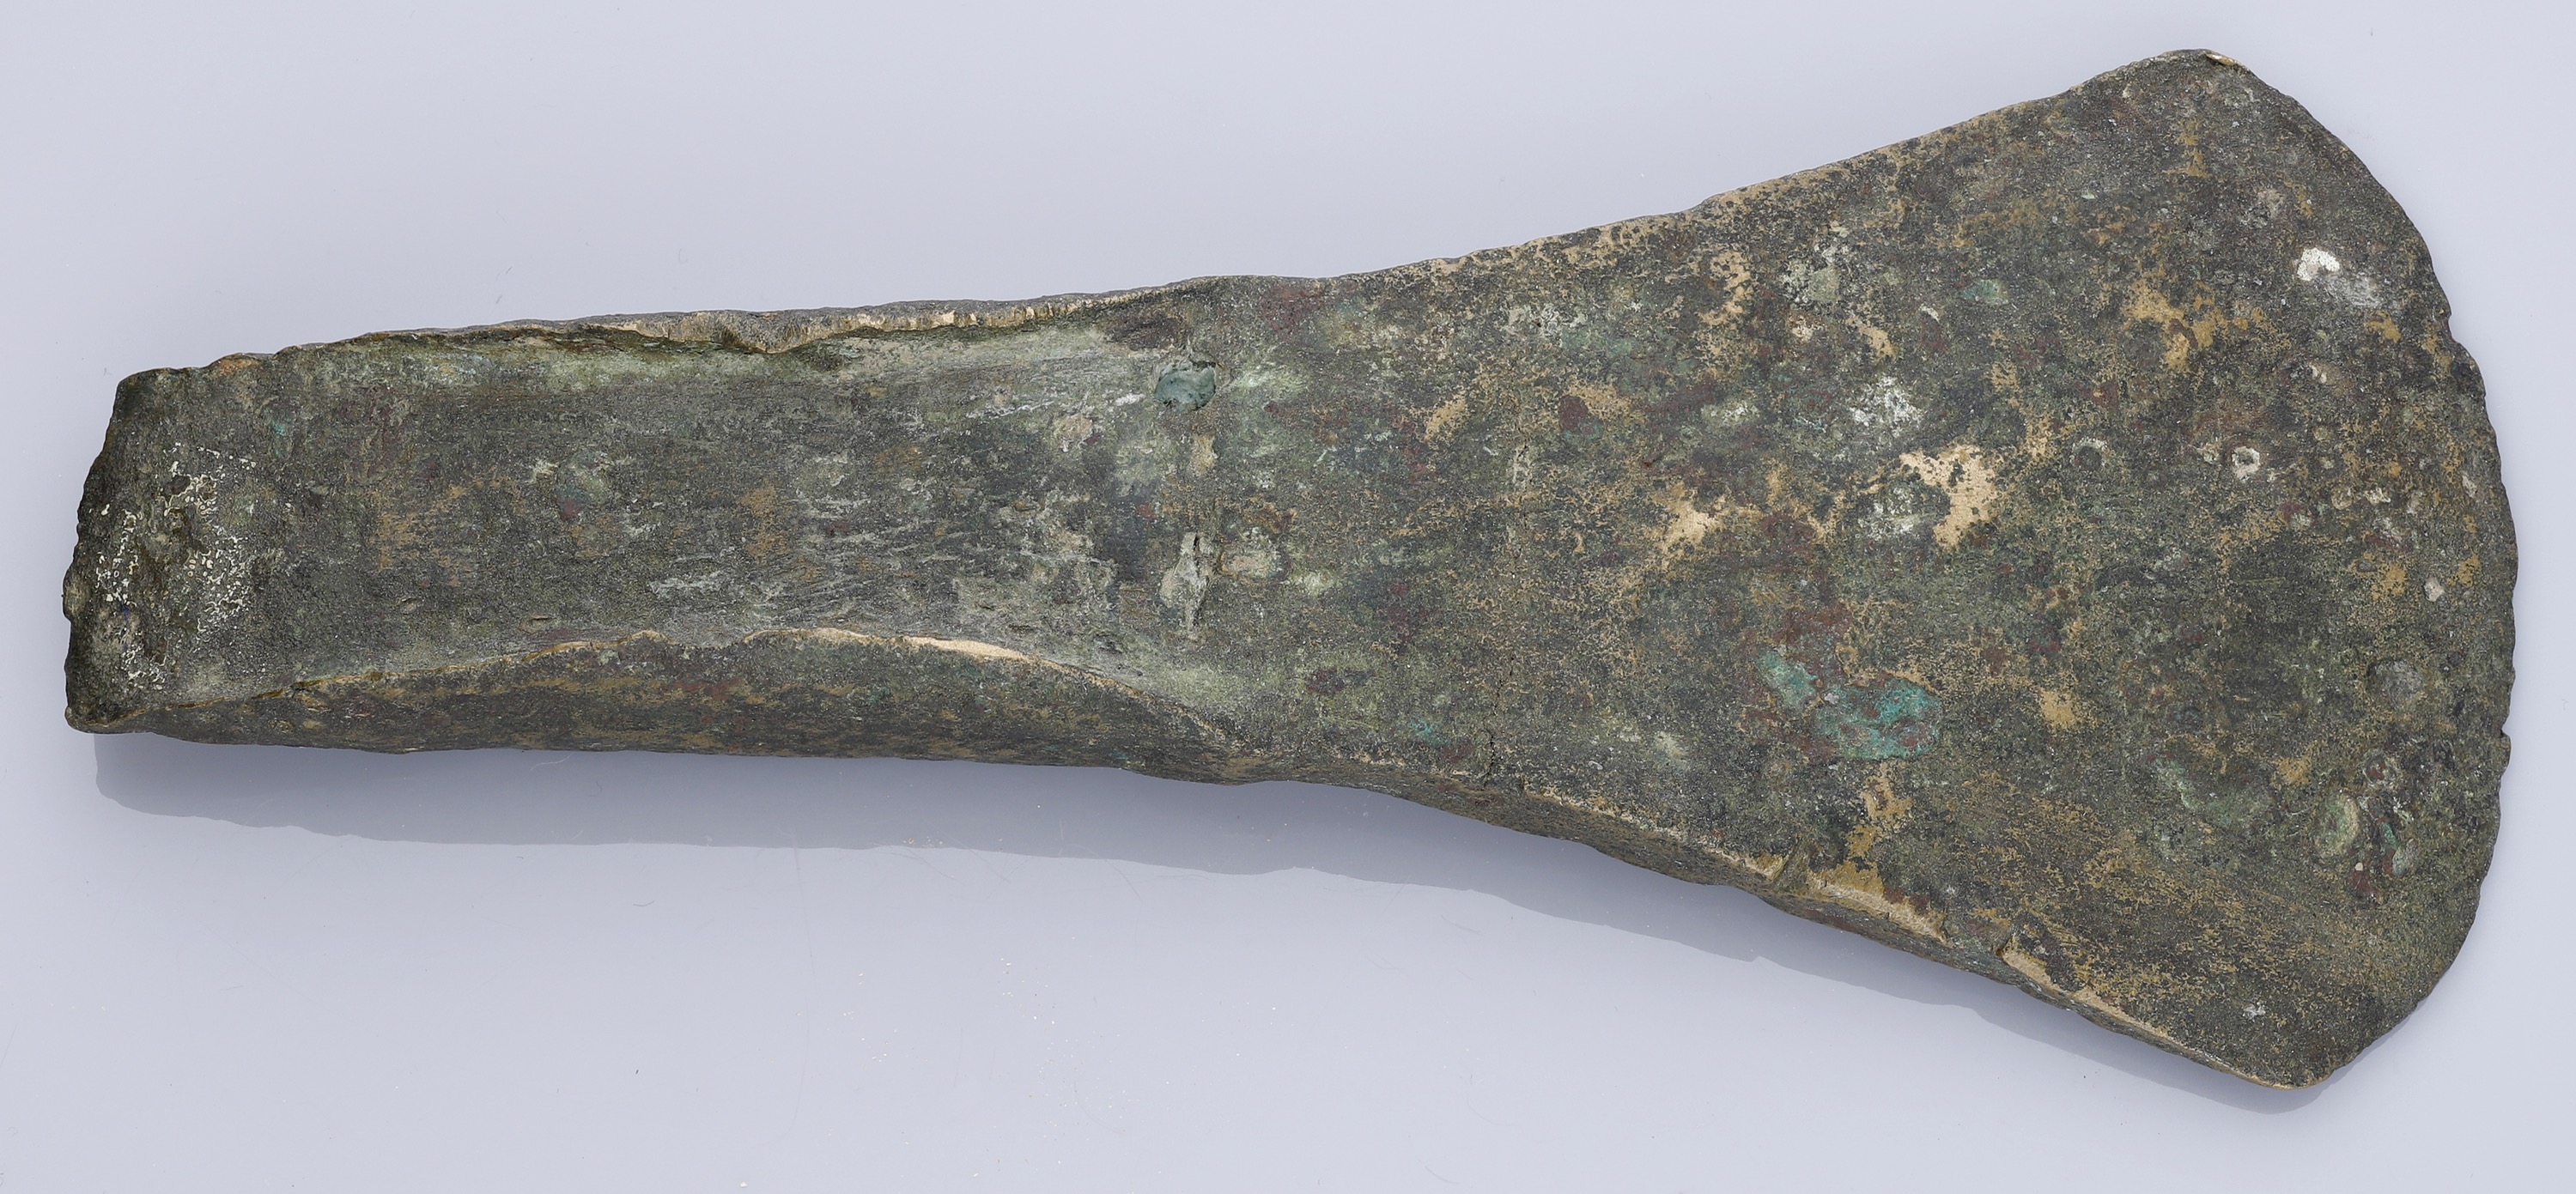 Bronze Age, a flat axe with side flanges, c. 1800-1500 BC, 15.5cm long by 7cm wide by 2cm de...